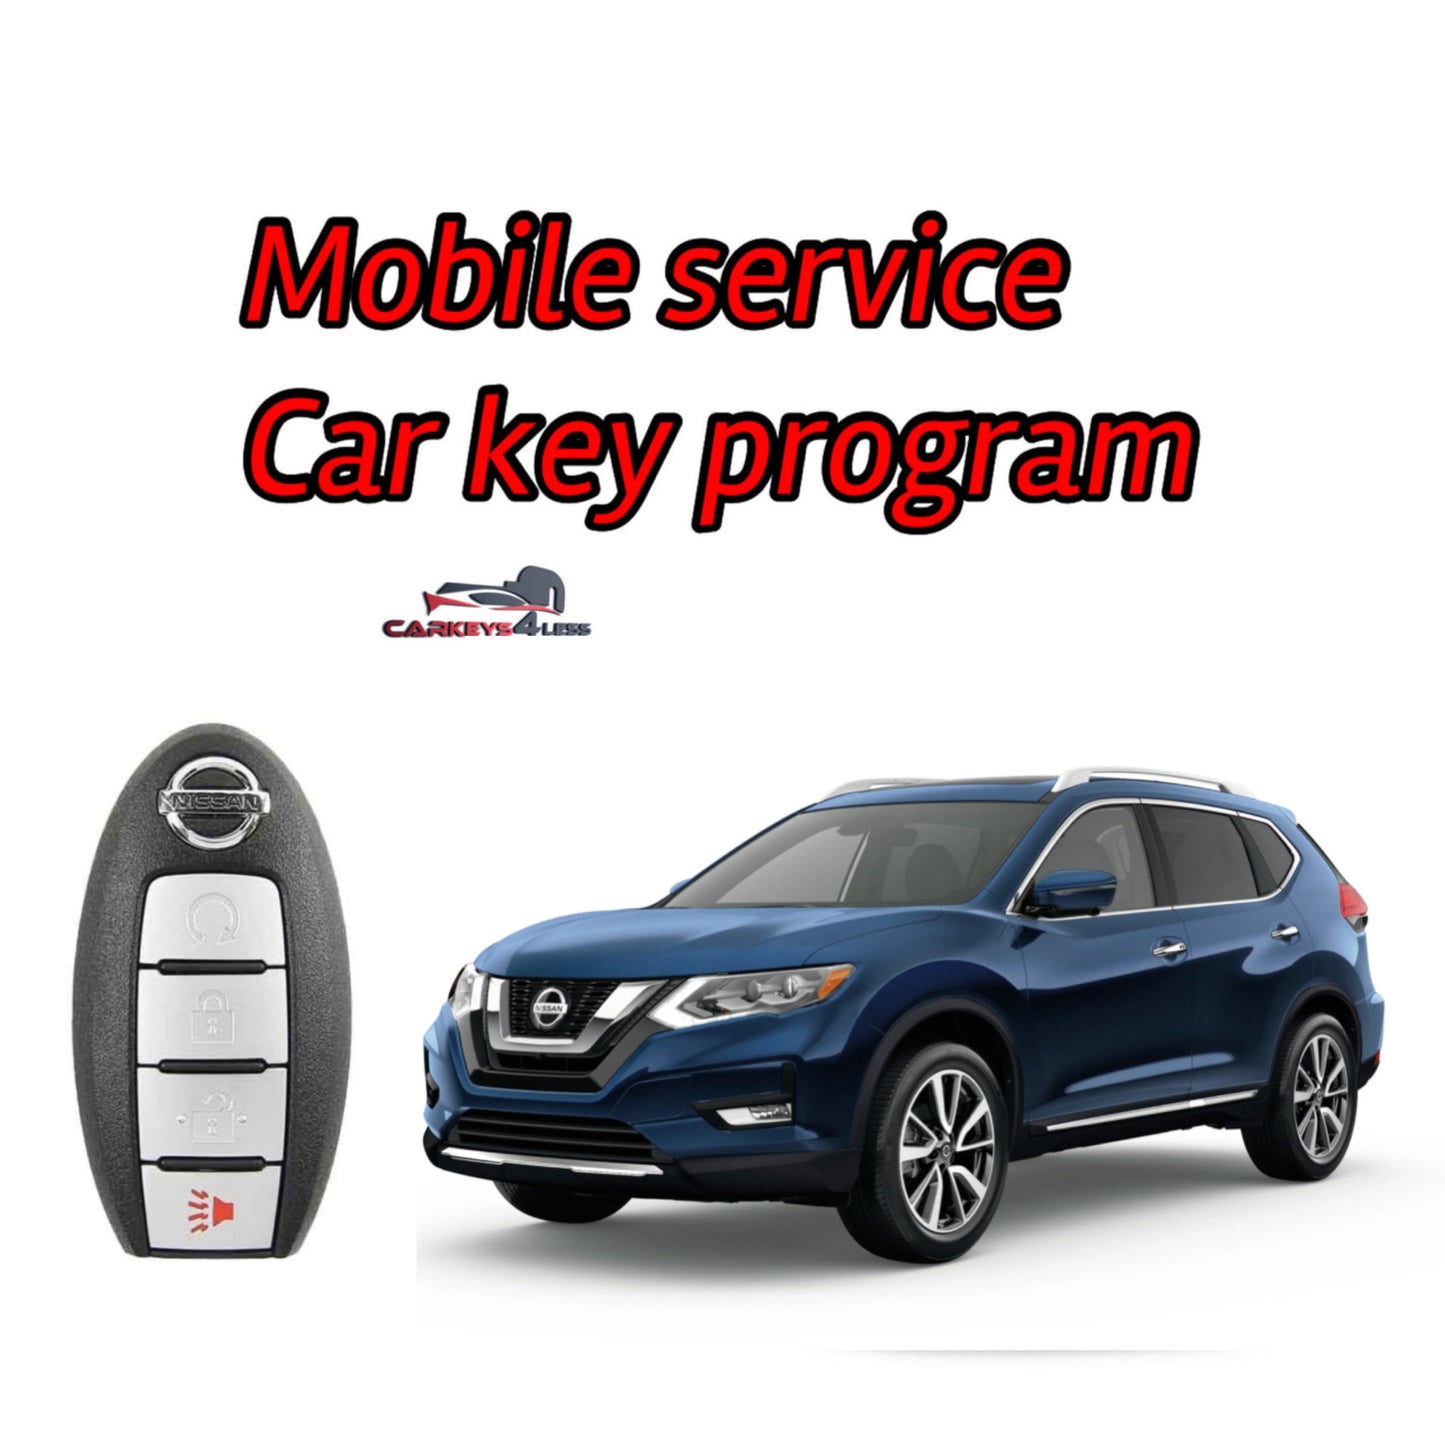 Mobile service for an oem refurbished nissan car key replacement